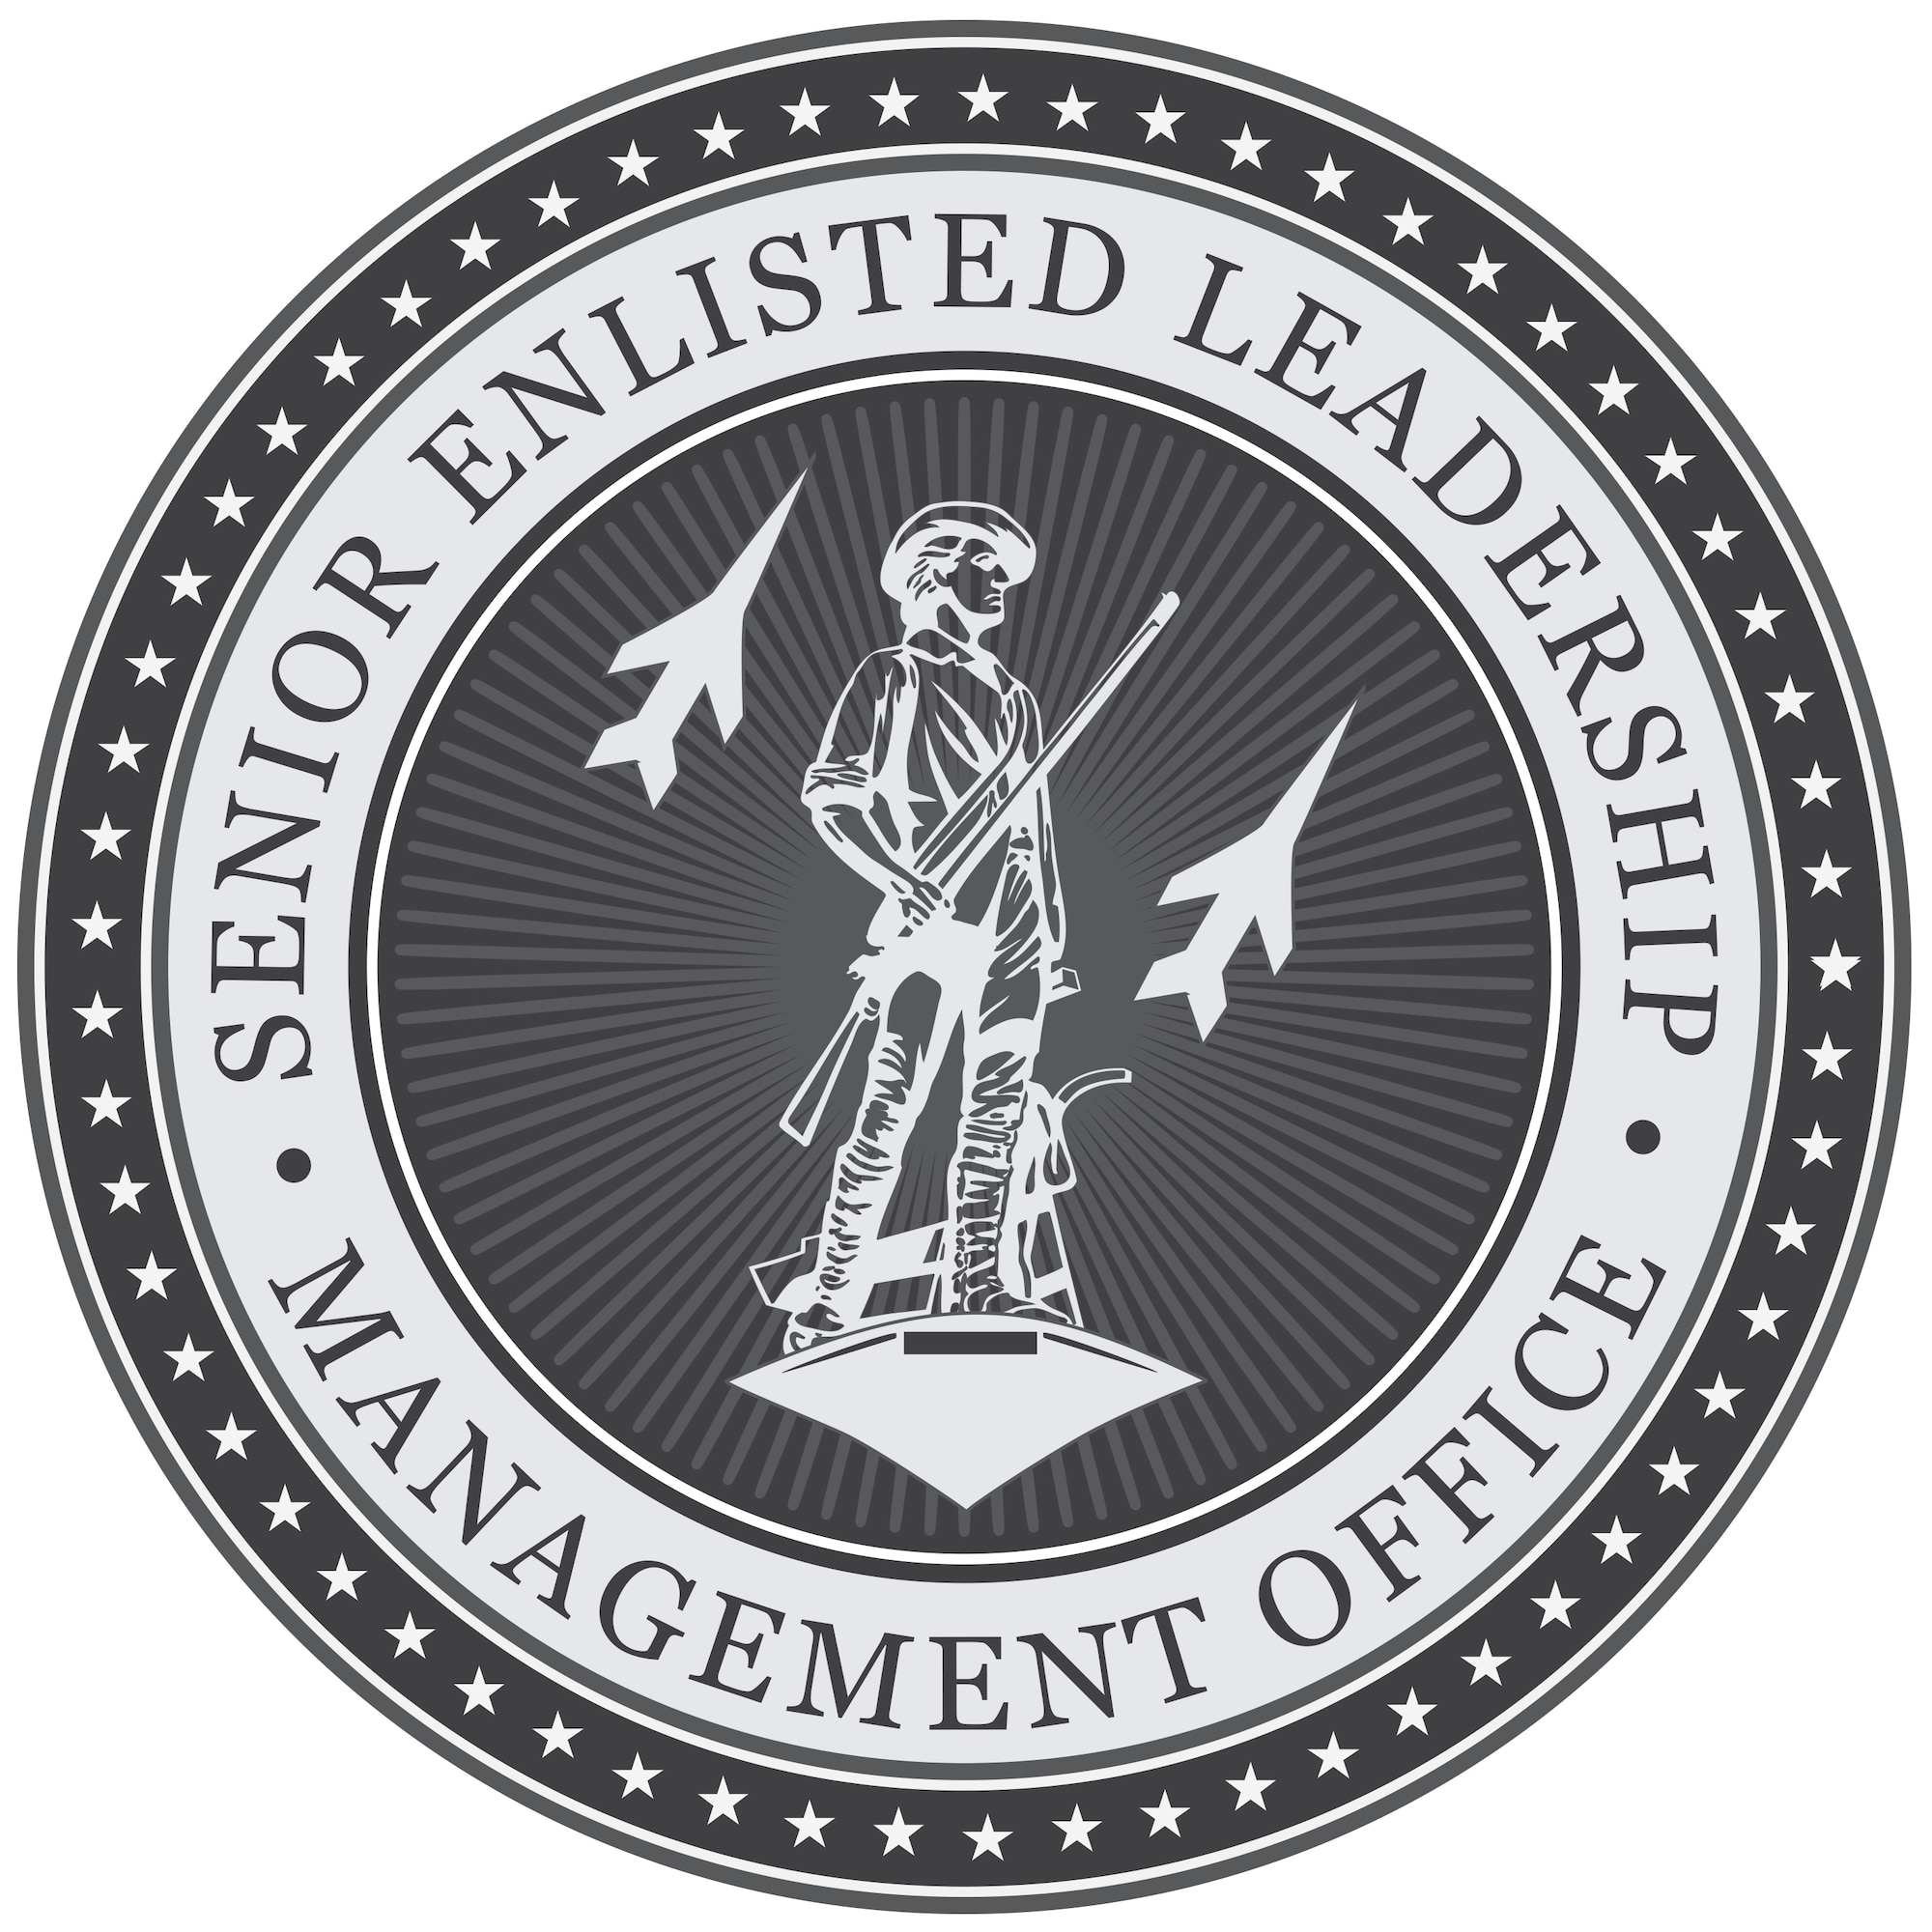 The Air National Guard Senior Enlisted Leadership Management Office was established to ensure that Air National Guard senior enlisted leaders receive the same opportunities for development currently offered to the active component. This would better allow the ANG's voice to be heard throughout the Air Force. (U.S. Air National Guard graphic illustration)